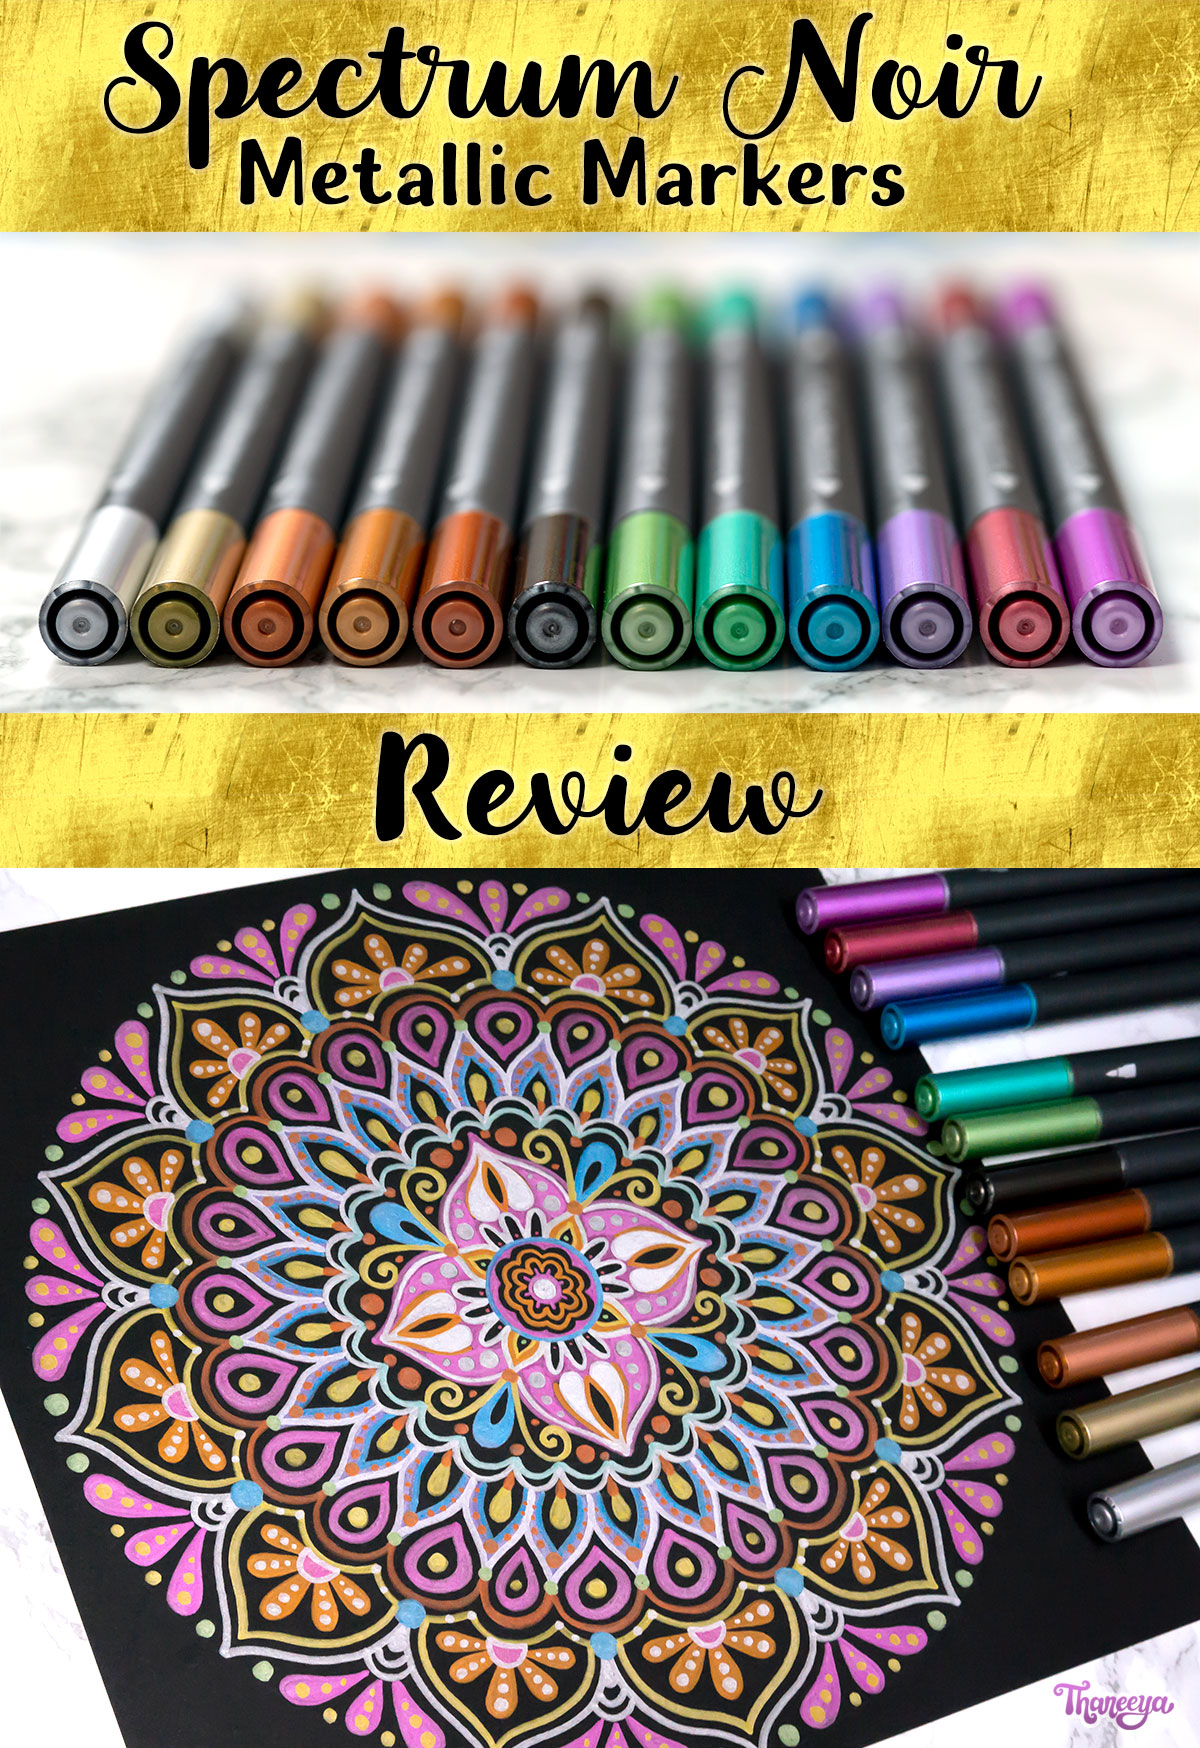 The Best Paint Pens For Arts and Crafts